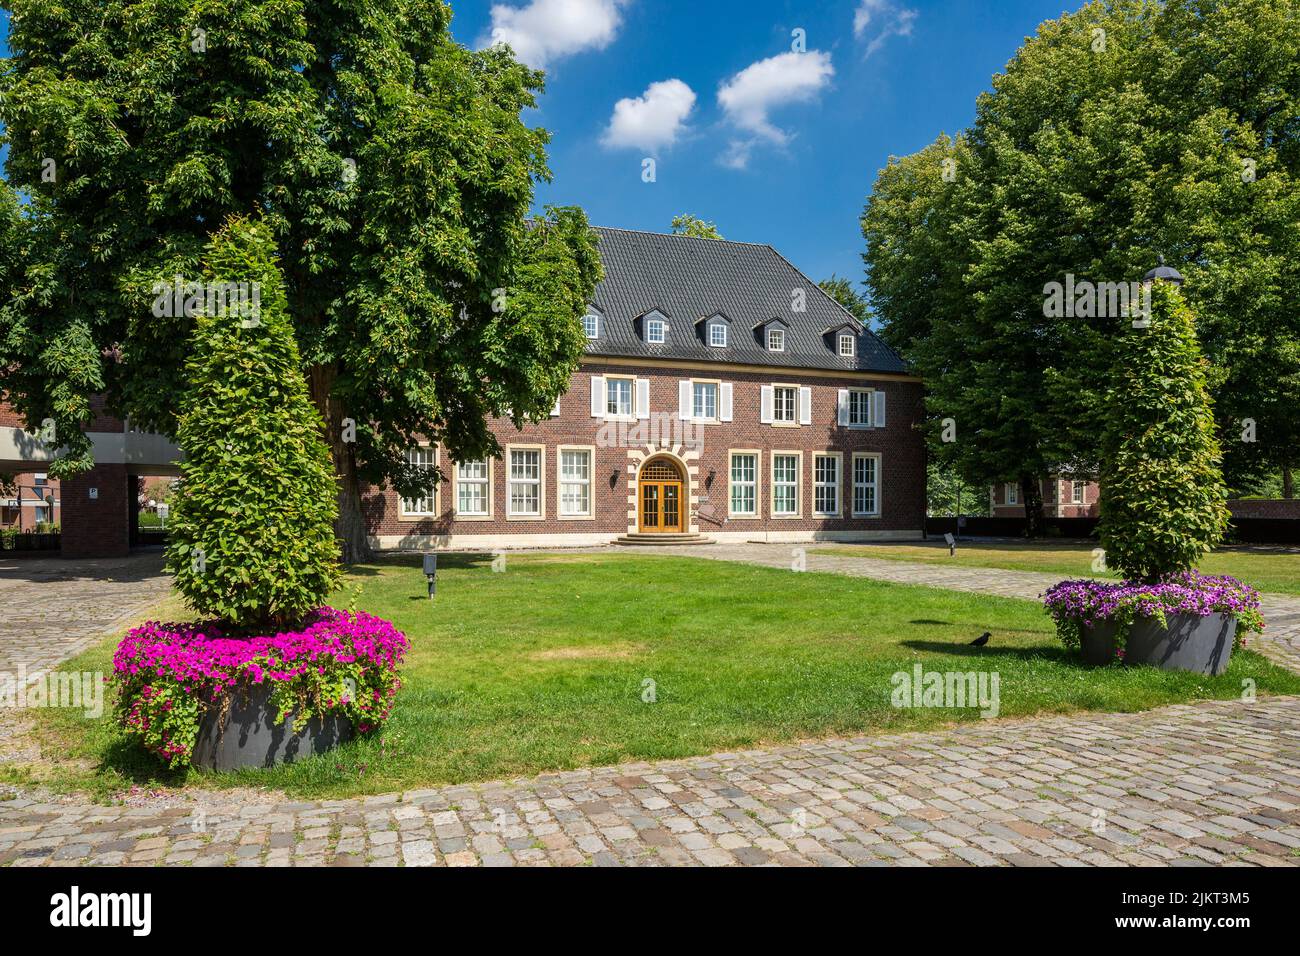 Germany, Ahaus, Westmuensterland, Muensterland, Westphalia, North Rhine-Westphalia, NRW, Ahaus District Court at the Suemmermannplatz in outer ward buildings of the Ahaus Castle, auxiliary building Stock Photo